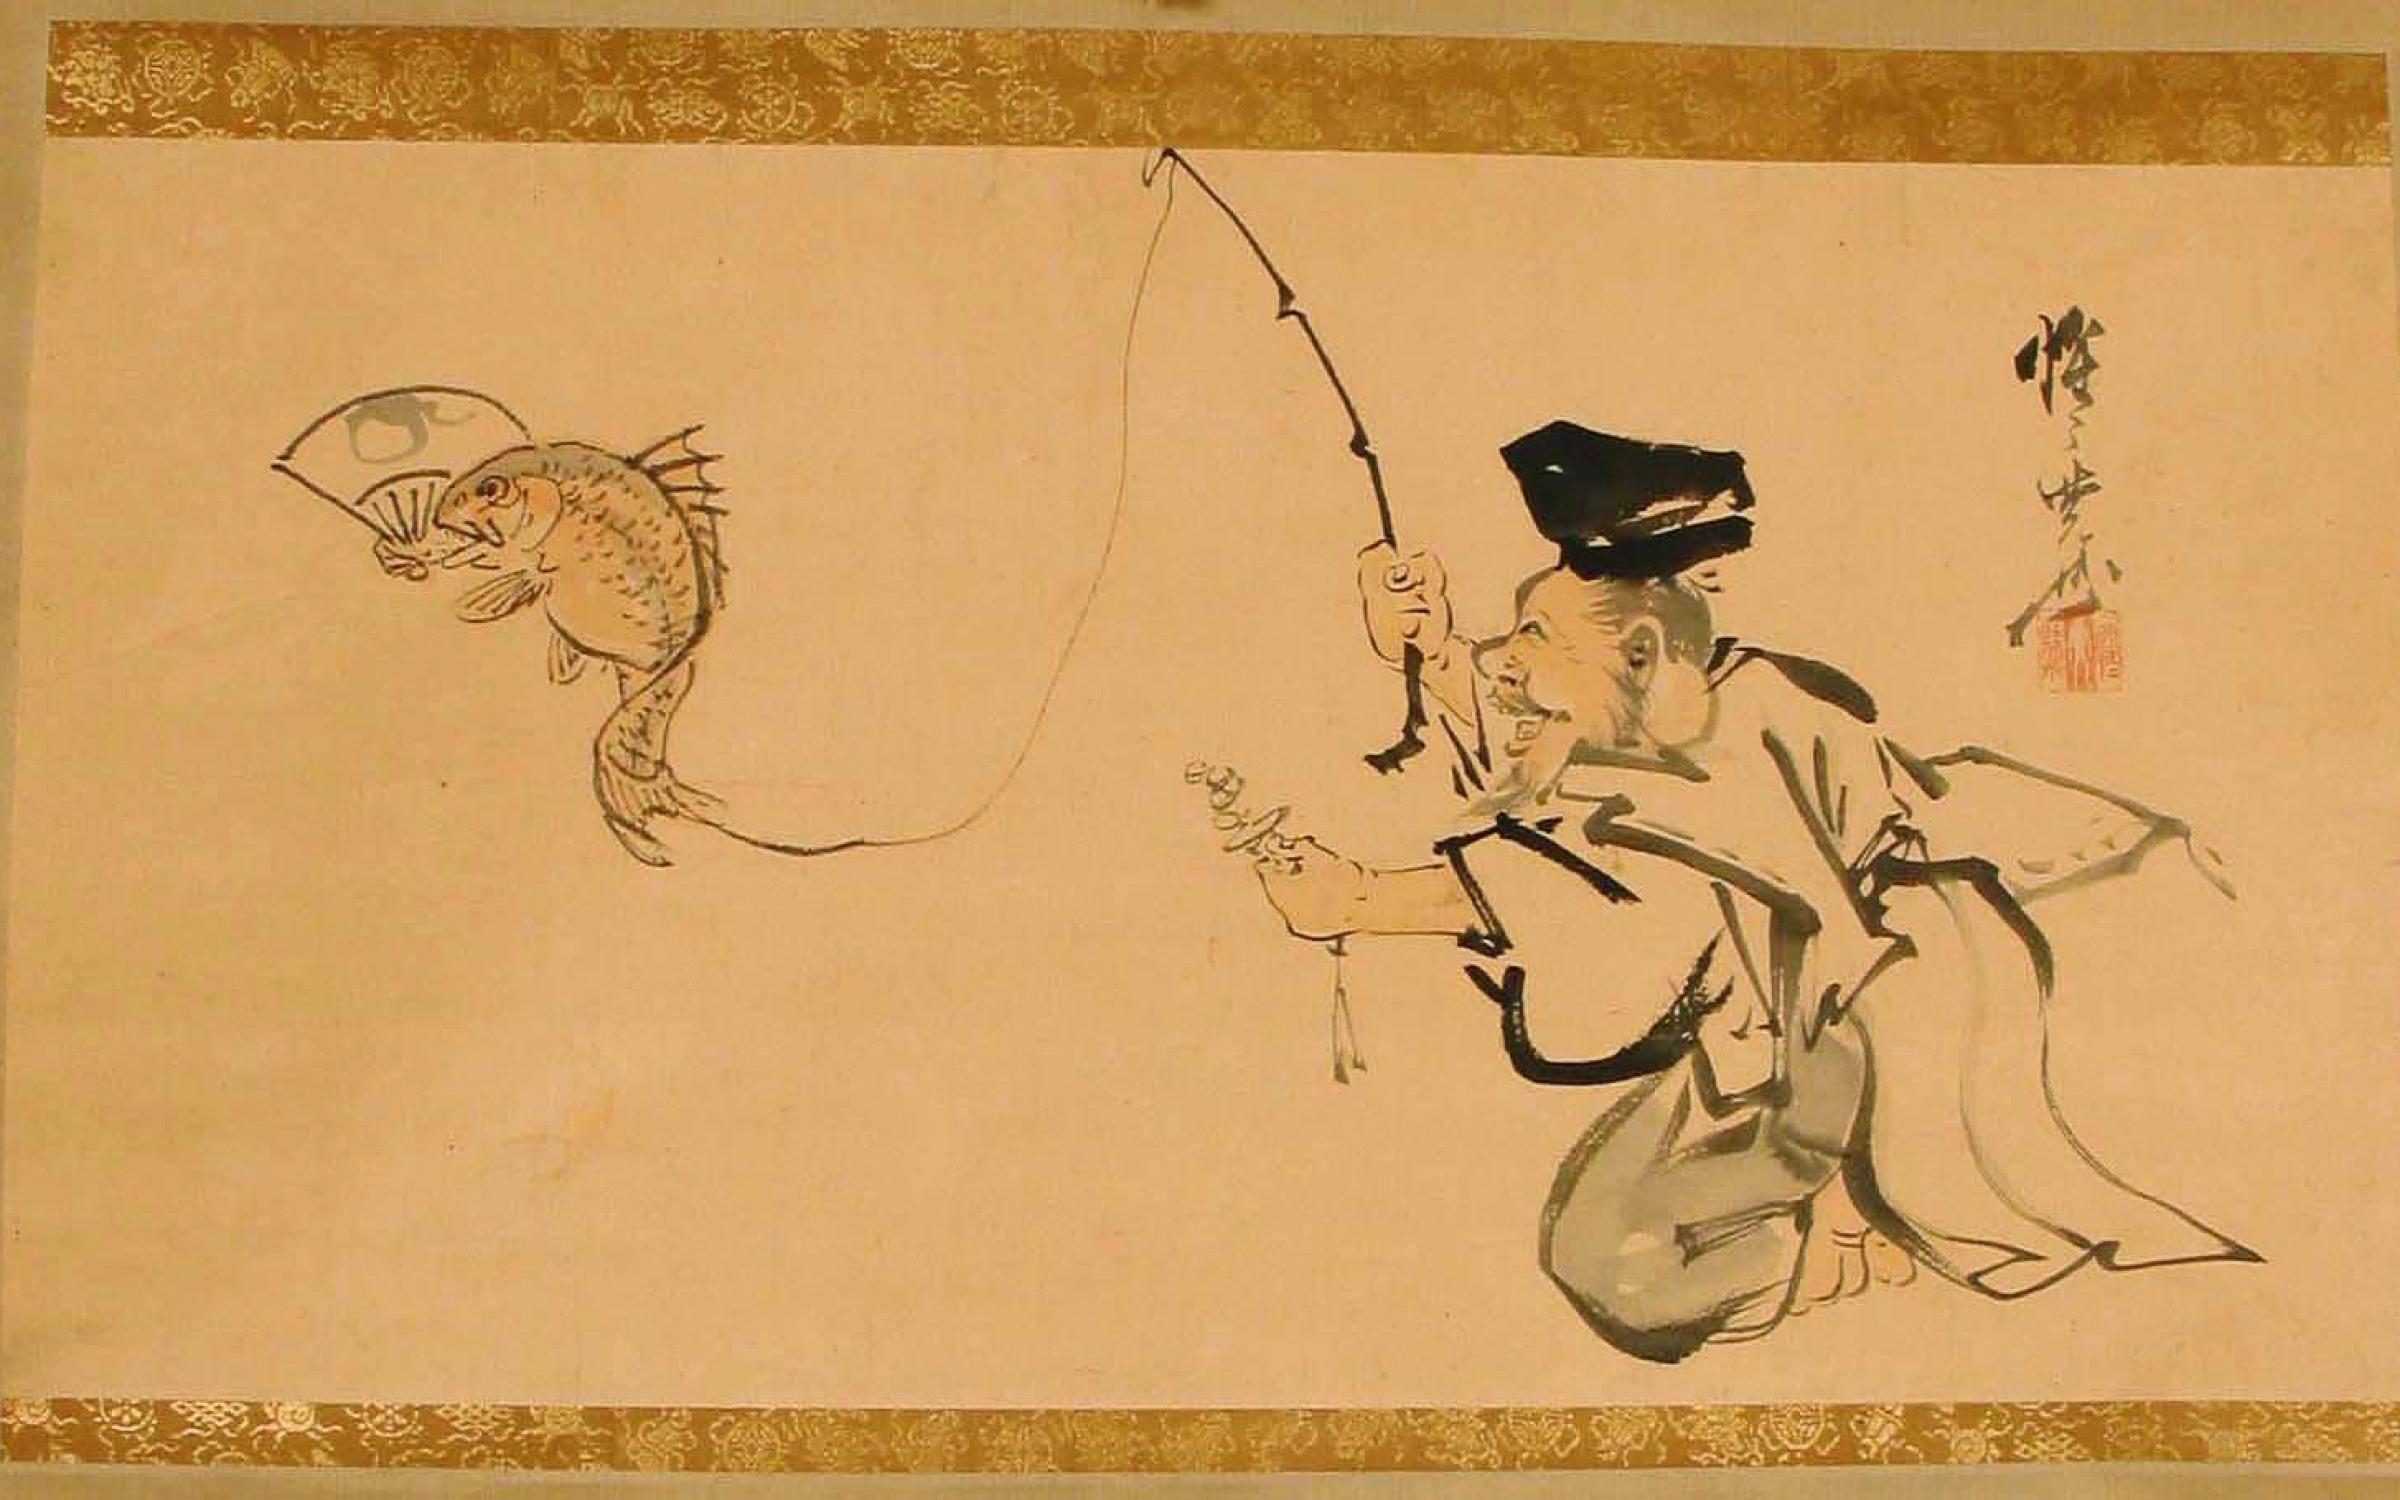 Kawanabe Gyosai, (Japanese, 1831-1889), Ebishu Holding a Fishing Pole,  1850-1899, ink and color on paper, gift of Dr. Marcus Jacobson, UMFA1993.039.004